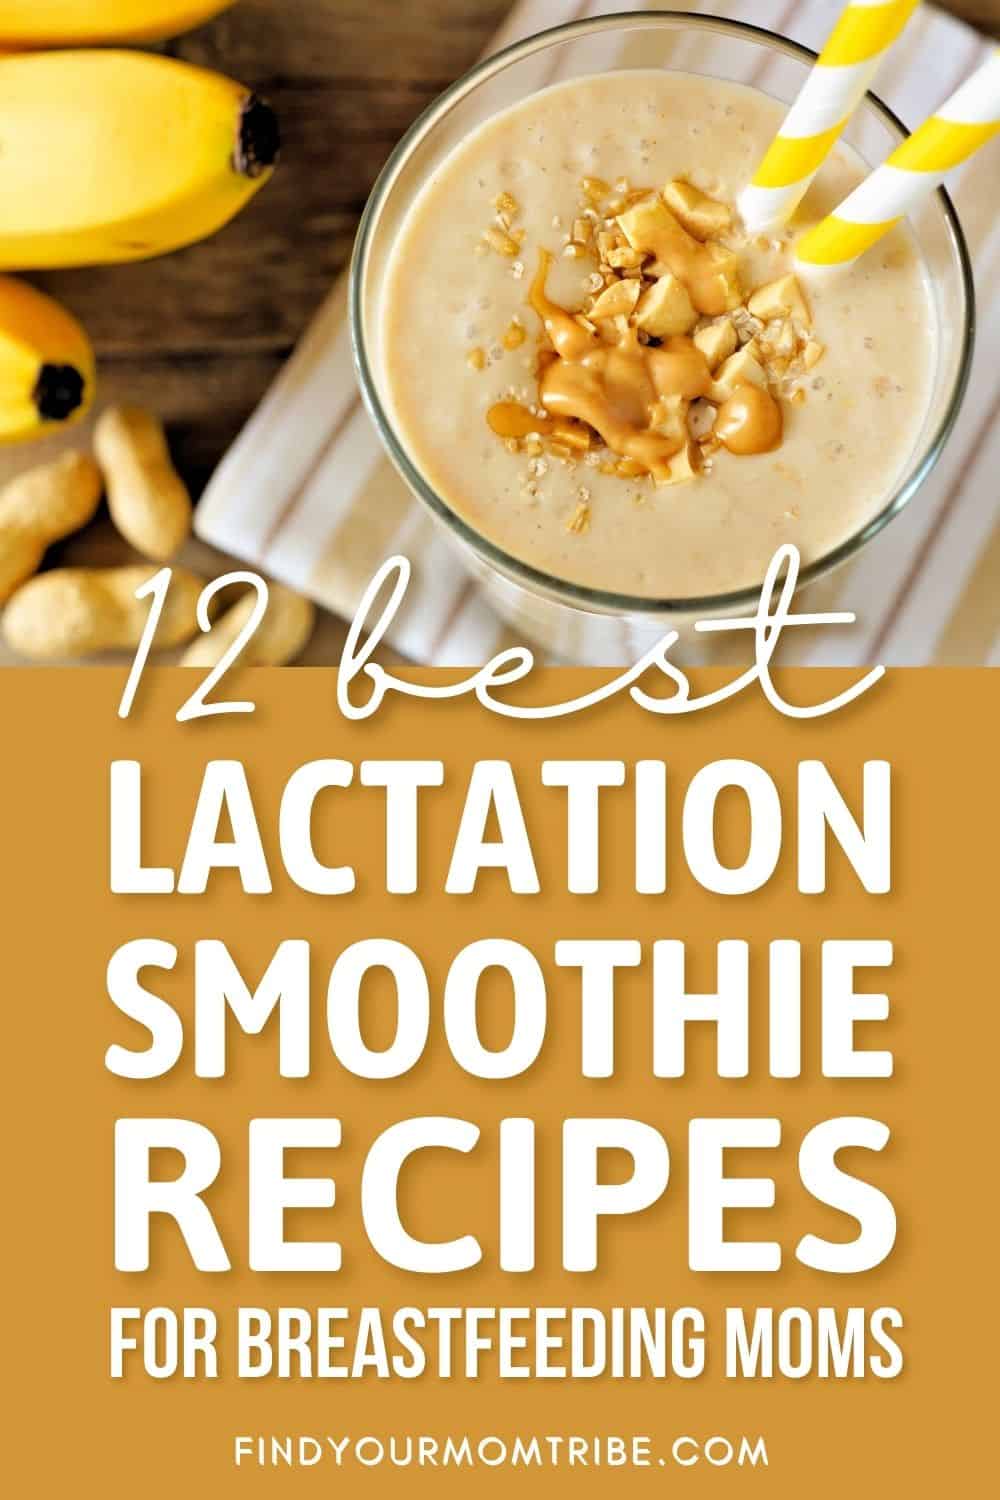 12 Best Lactation Smoothie Recipes For Breastfeeding Moms